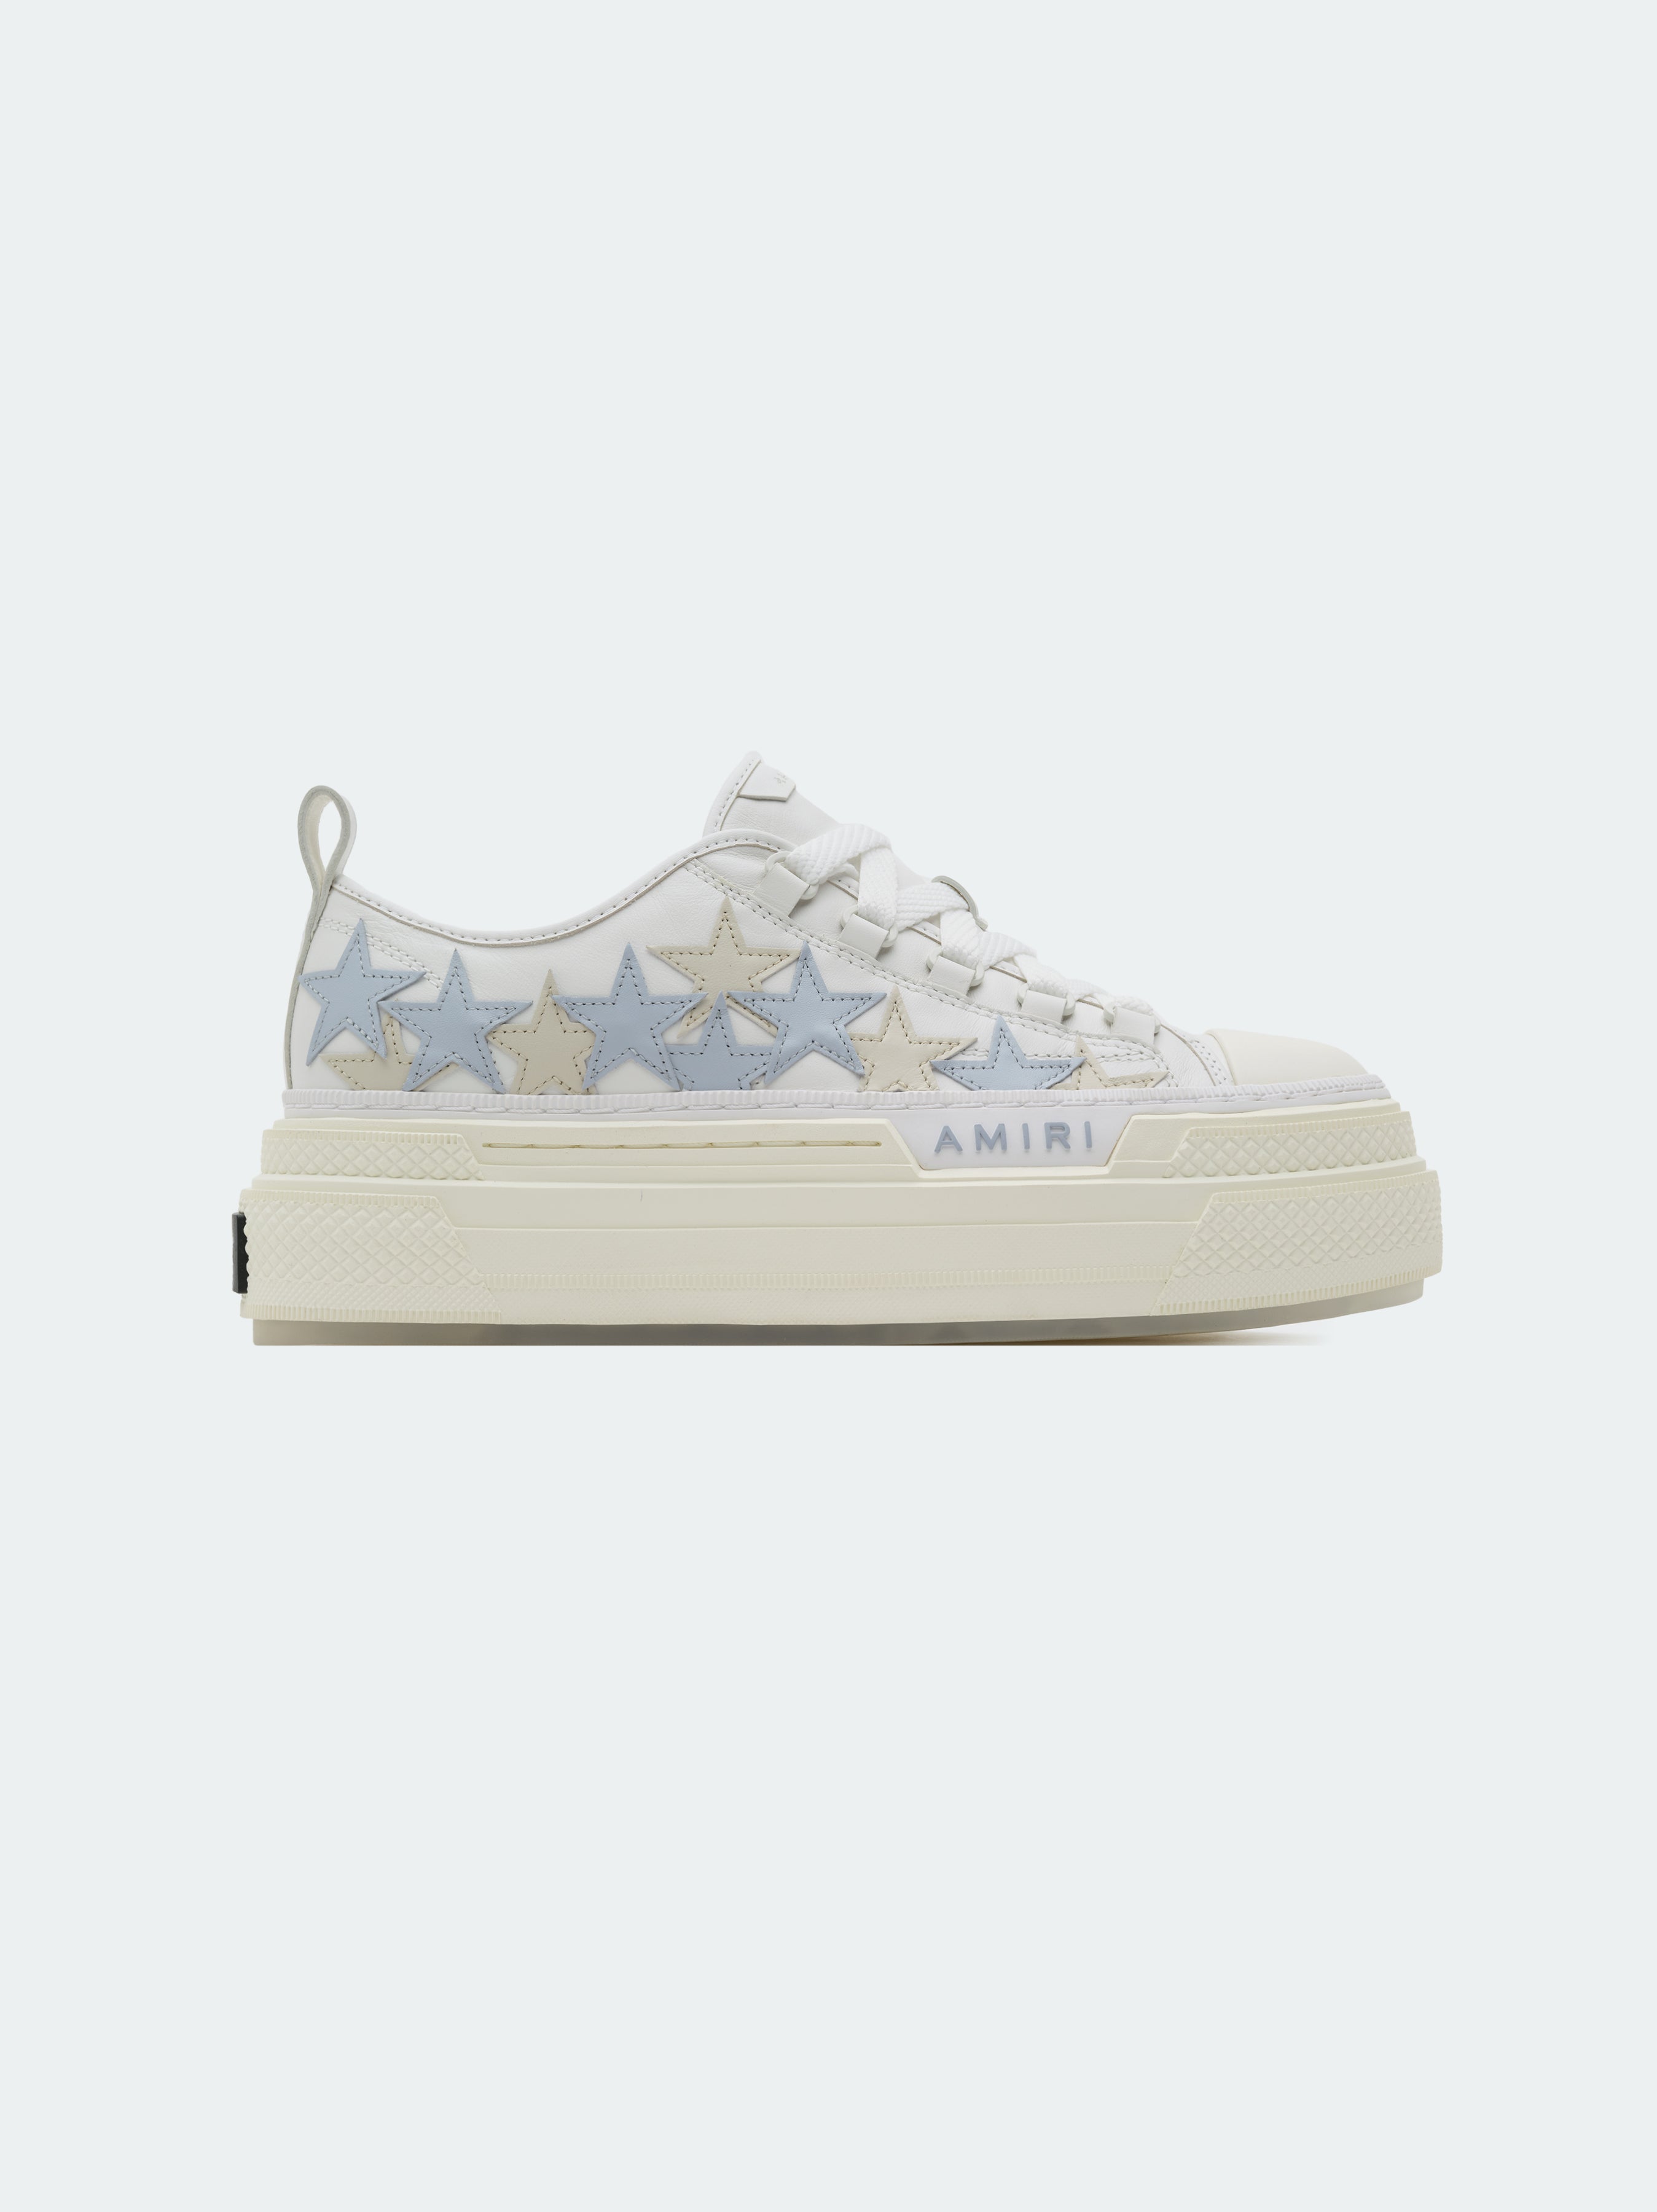 Product WOMEN - PLATFORM STARS COURT LOW - Grey Blue featured image